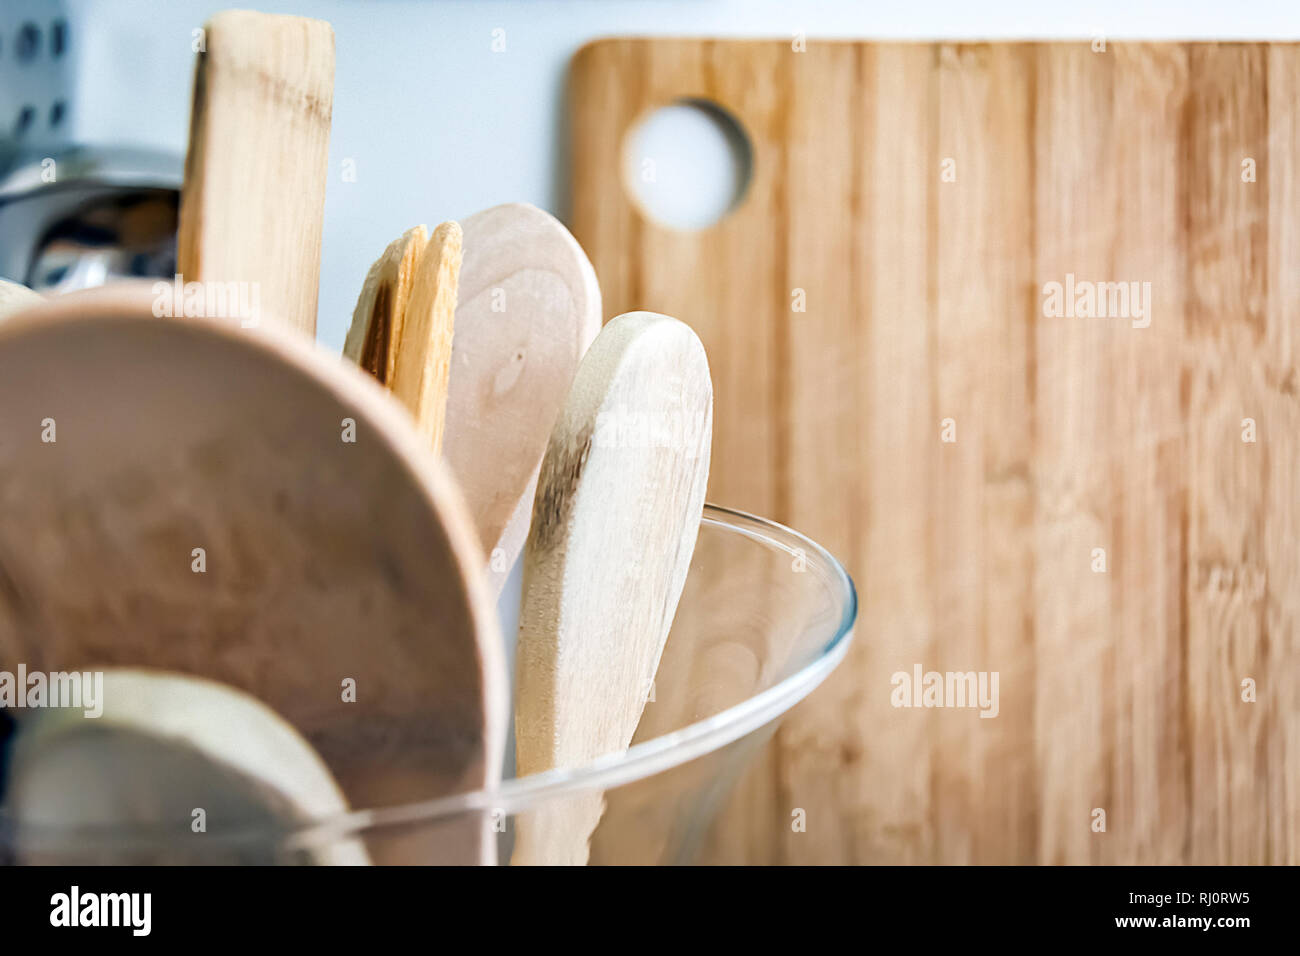 Wooden kitchen utensils in a glass container with a wooden cutting board in the background. Kitchen interior shot. Home decor and cooking concept Stock Photo